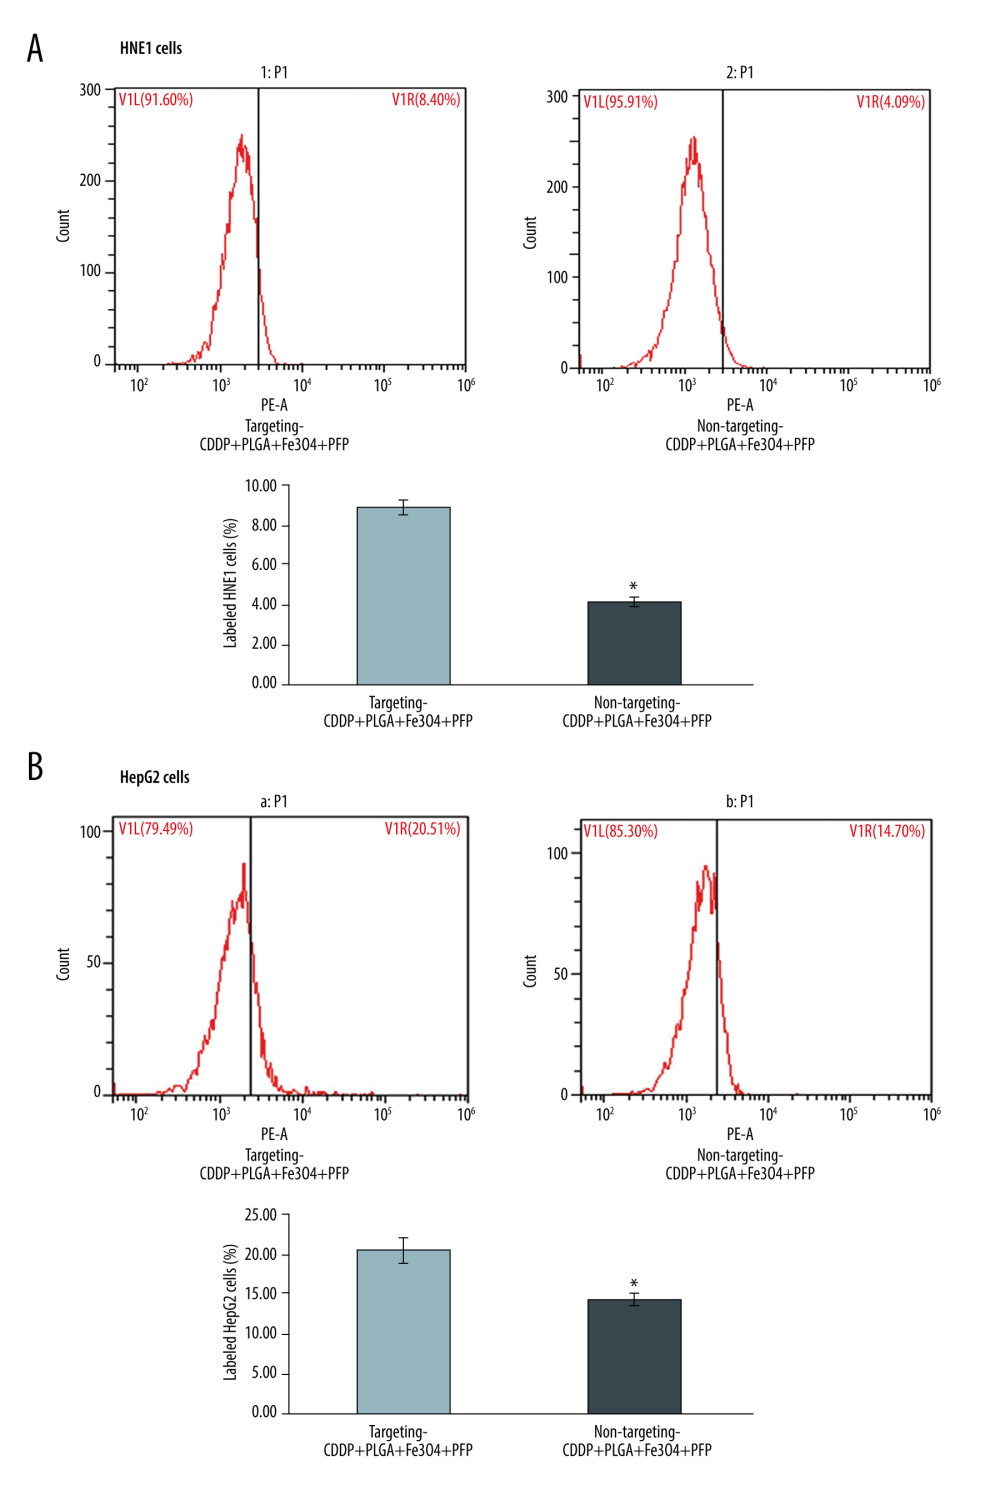 Evaluation for binding efficiency of PLGA+Fe3O4+PFP nanoparticles carried targeting CDDP with HNE1 cells (A) and HepG2 cells (B). Flow cytometry assay was conducted to examine targeting CDDP binding HNE1 or HepG2 cells. * P<0.05 vs targeting CDDP+PLGA+Fe3O4+PFP group. Microsoft Office PowerPoint/EXCELL 2010 (Redmond, WA, USA) was used to create images (n=6).